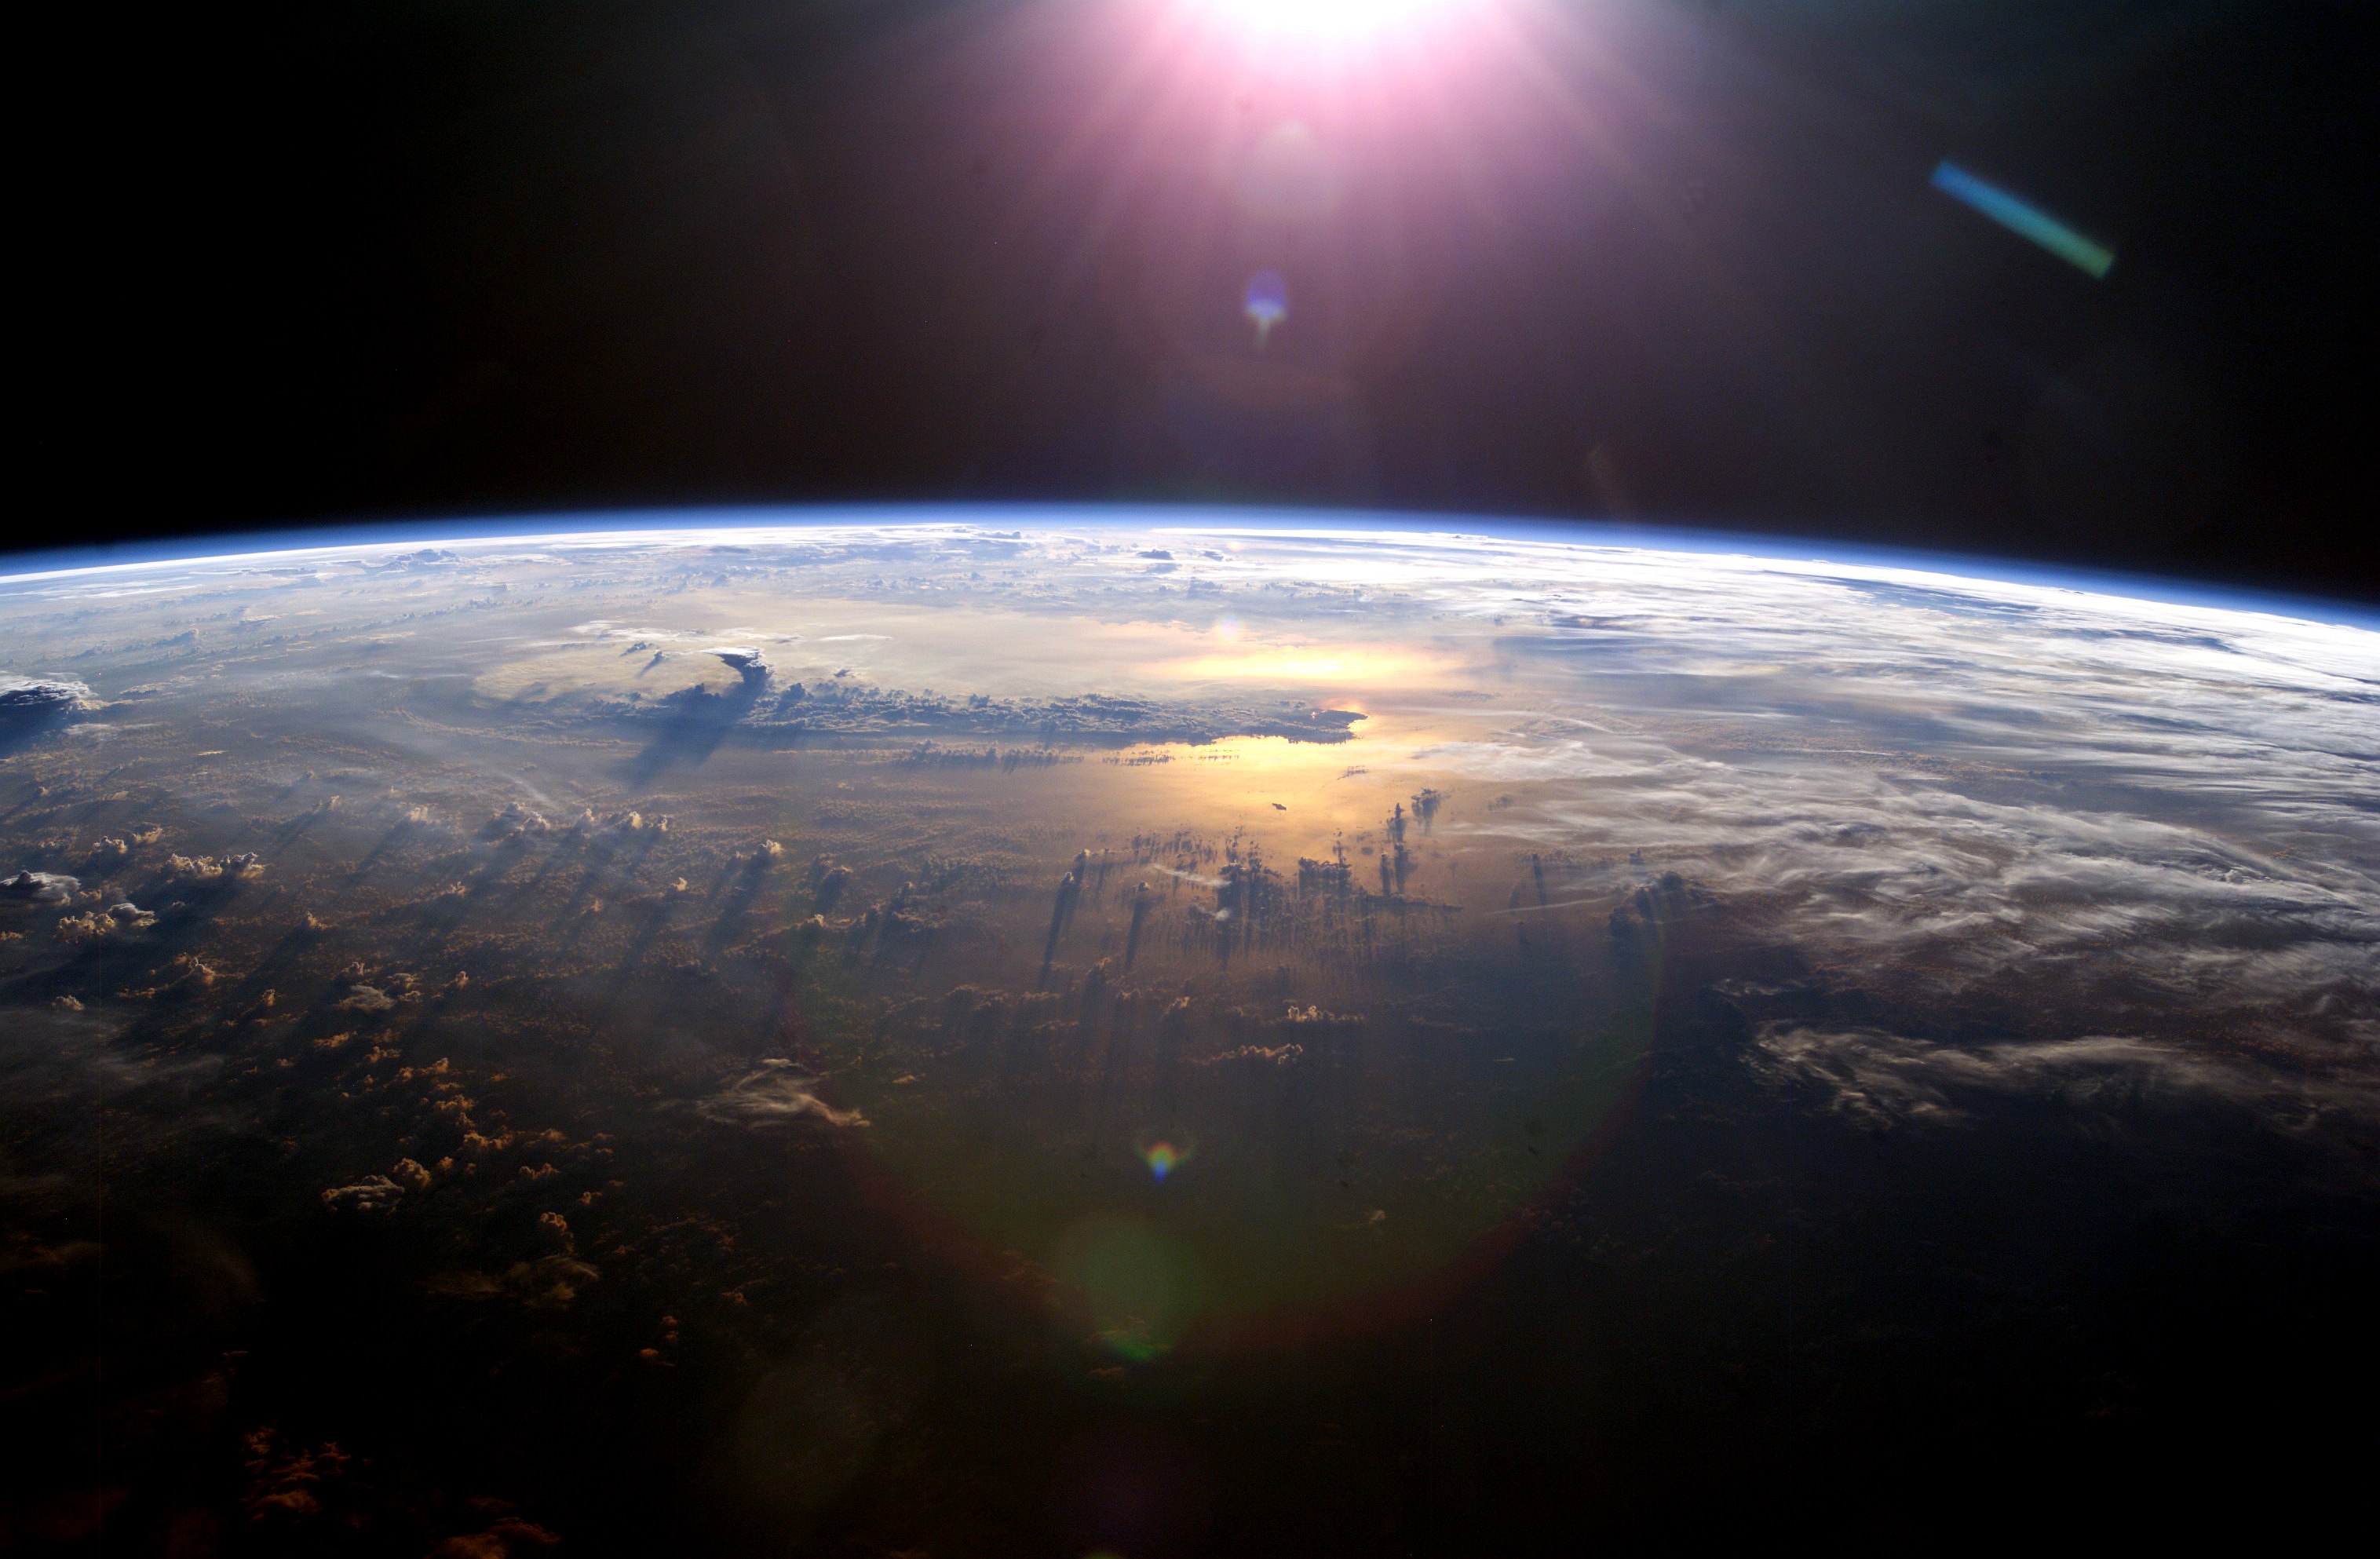 Space: A breathtaking view of Earth from high above, showcasing our beautiful planet in vivid detail.